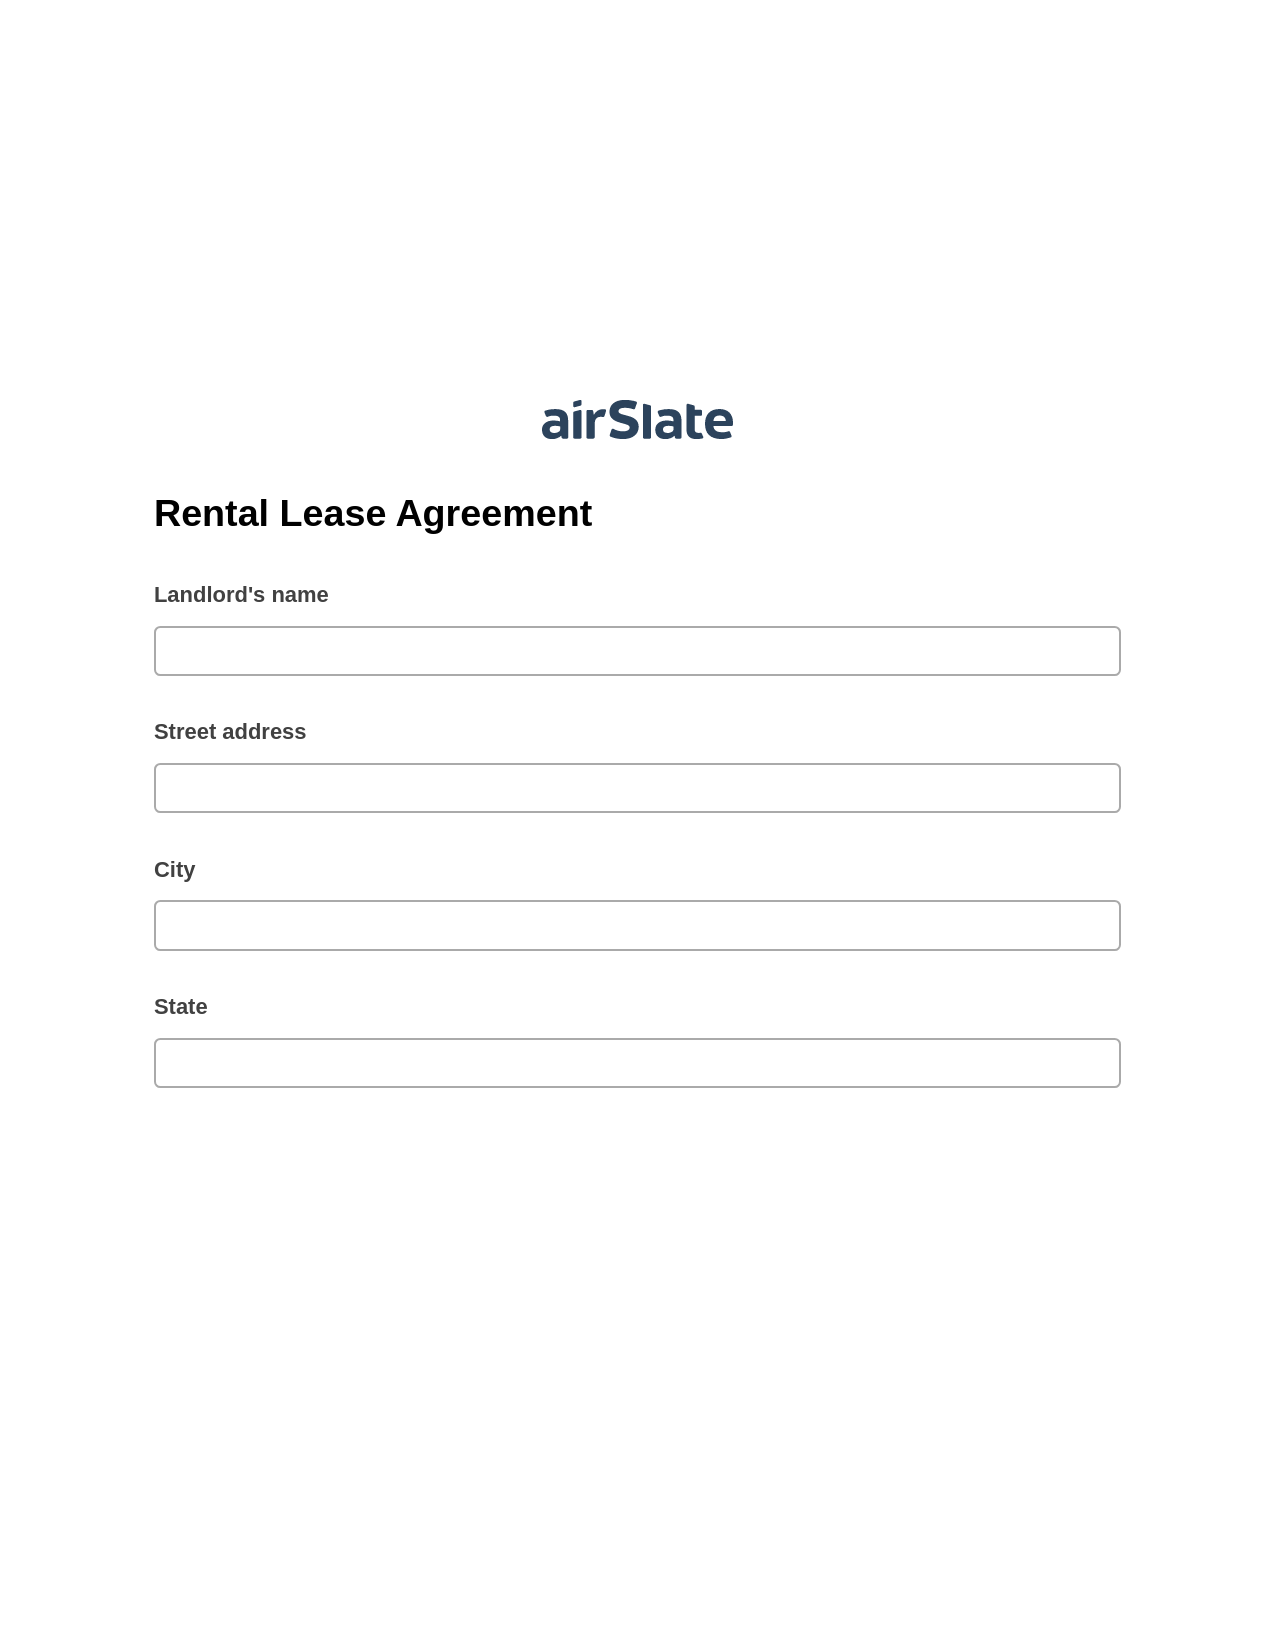 Rental Lease Agreement Pre-fill Dropdown from Airtable, Audit Trail Bot, Box Bot